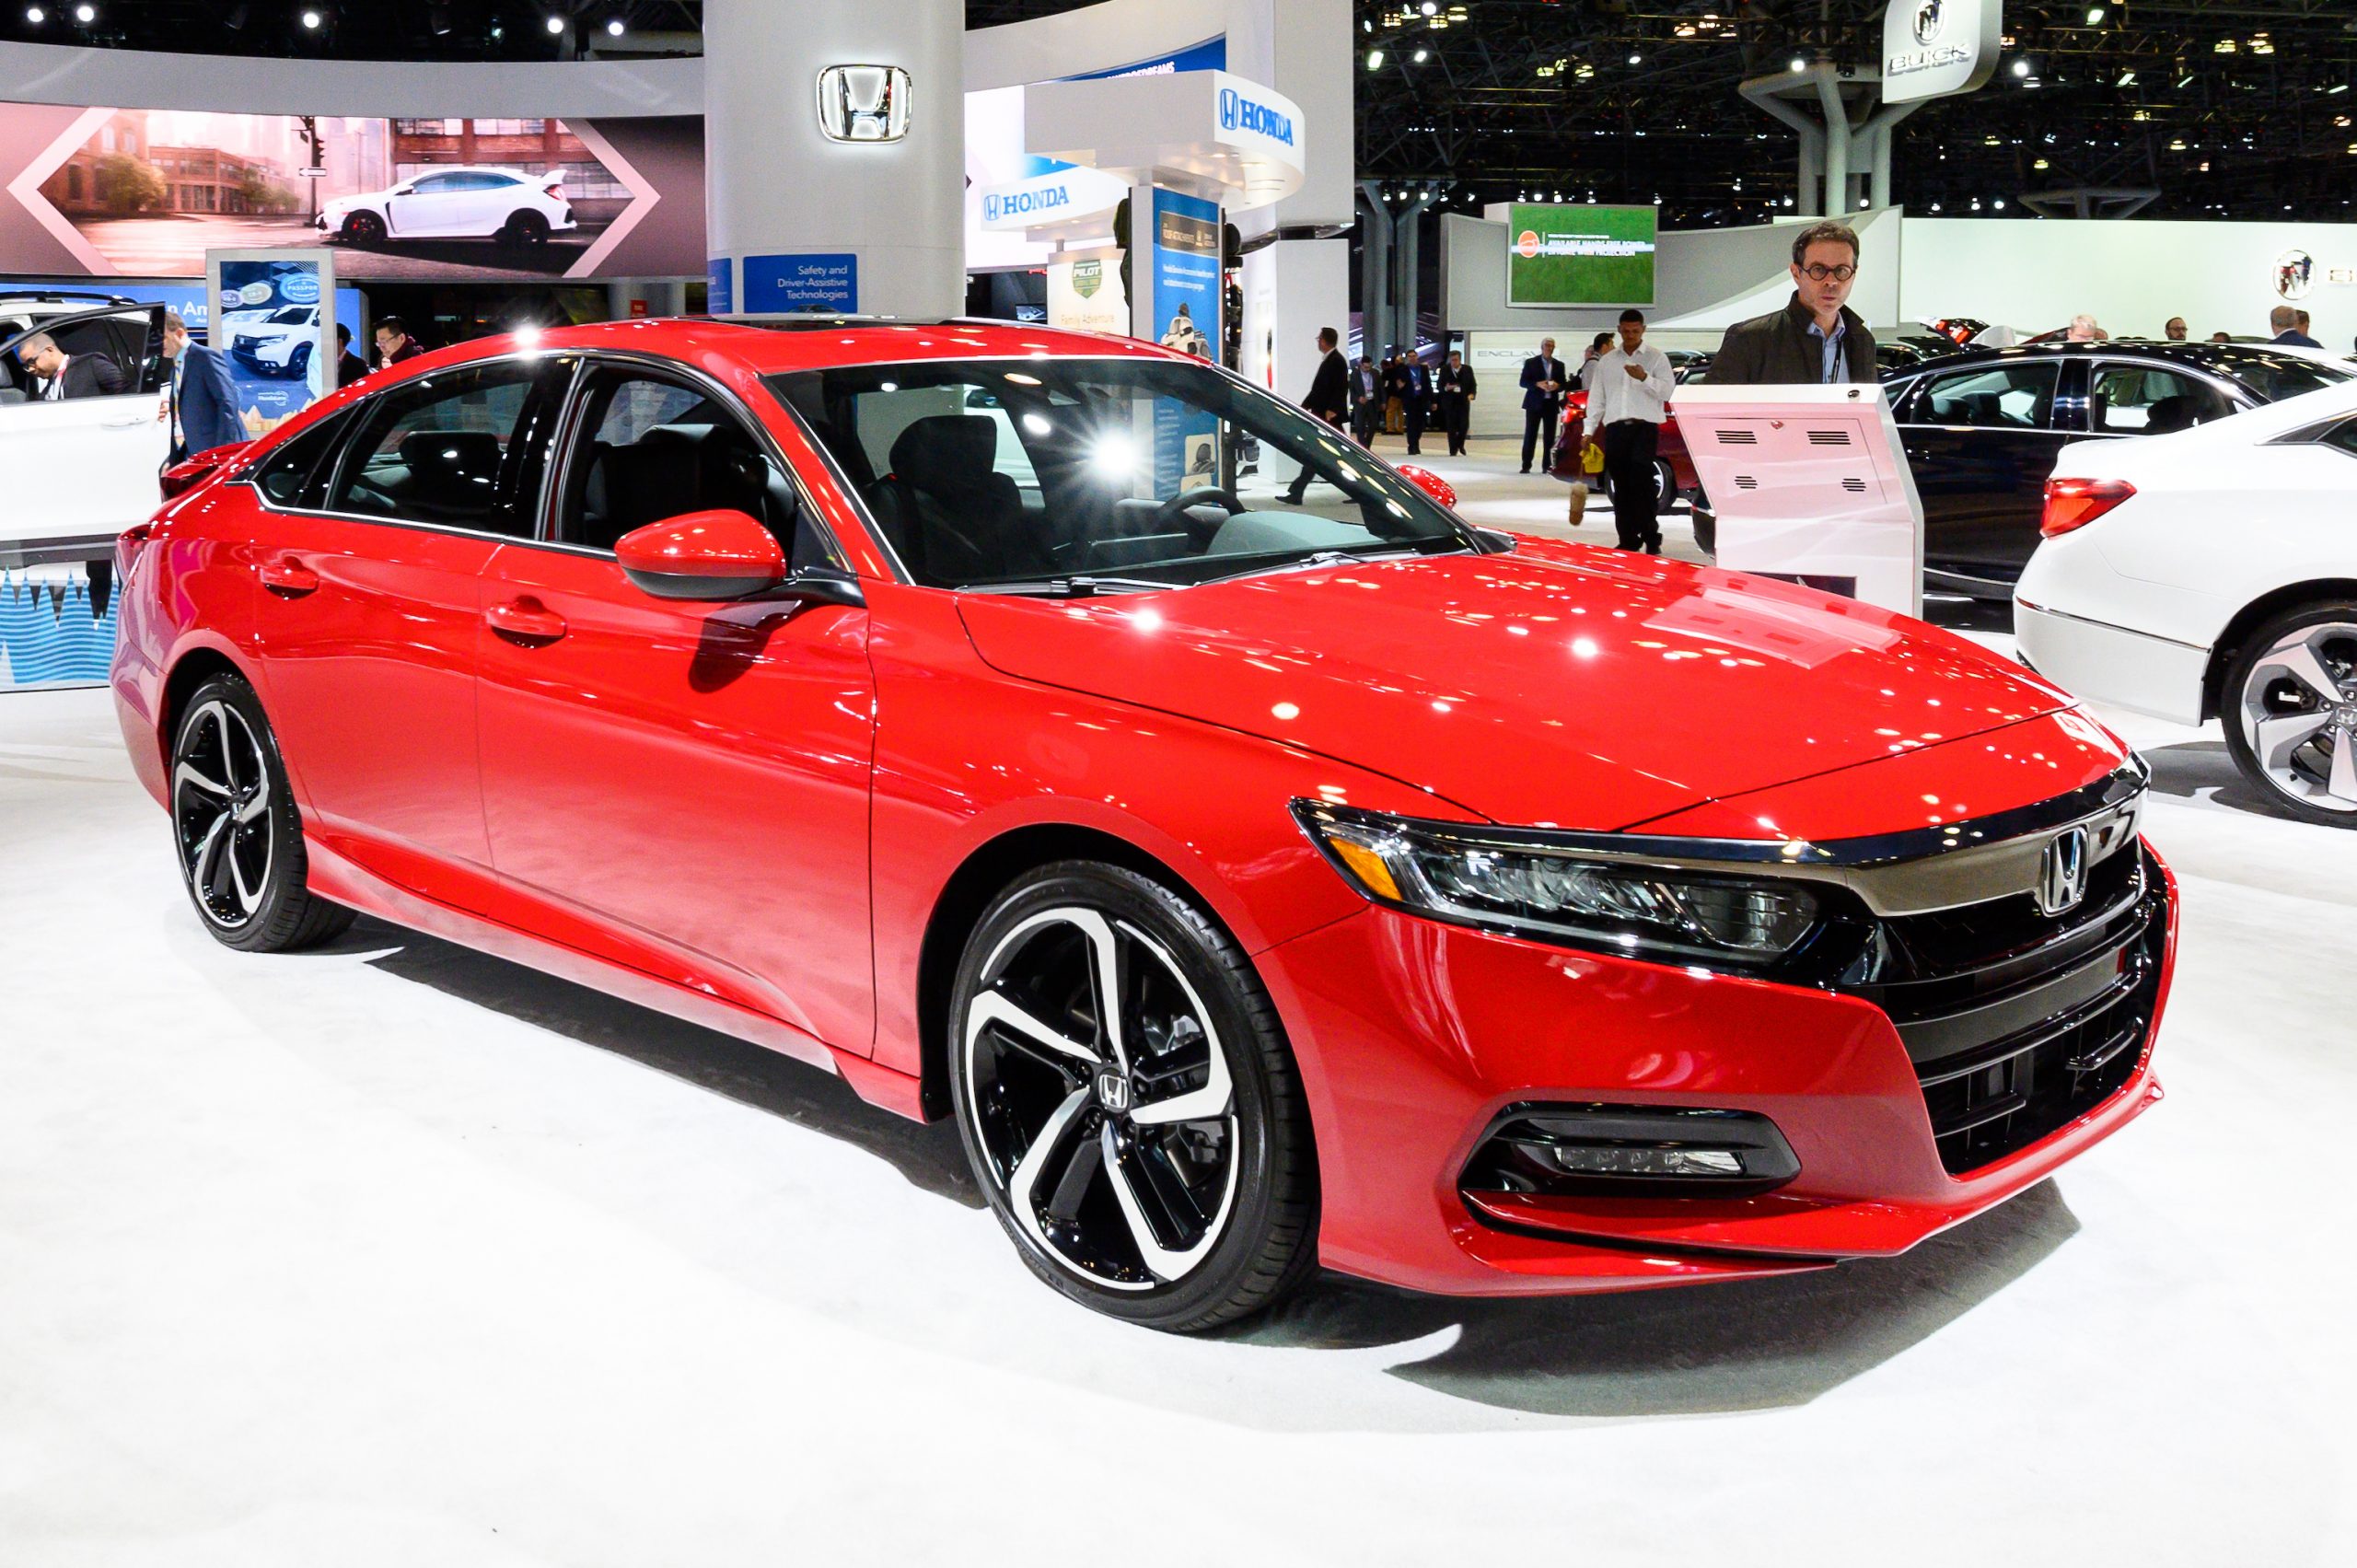 Red Honda Accord seen at the New York International Auto Show at the Jacob K. Javits Convention Center